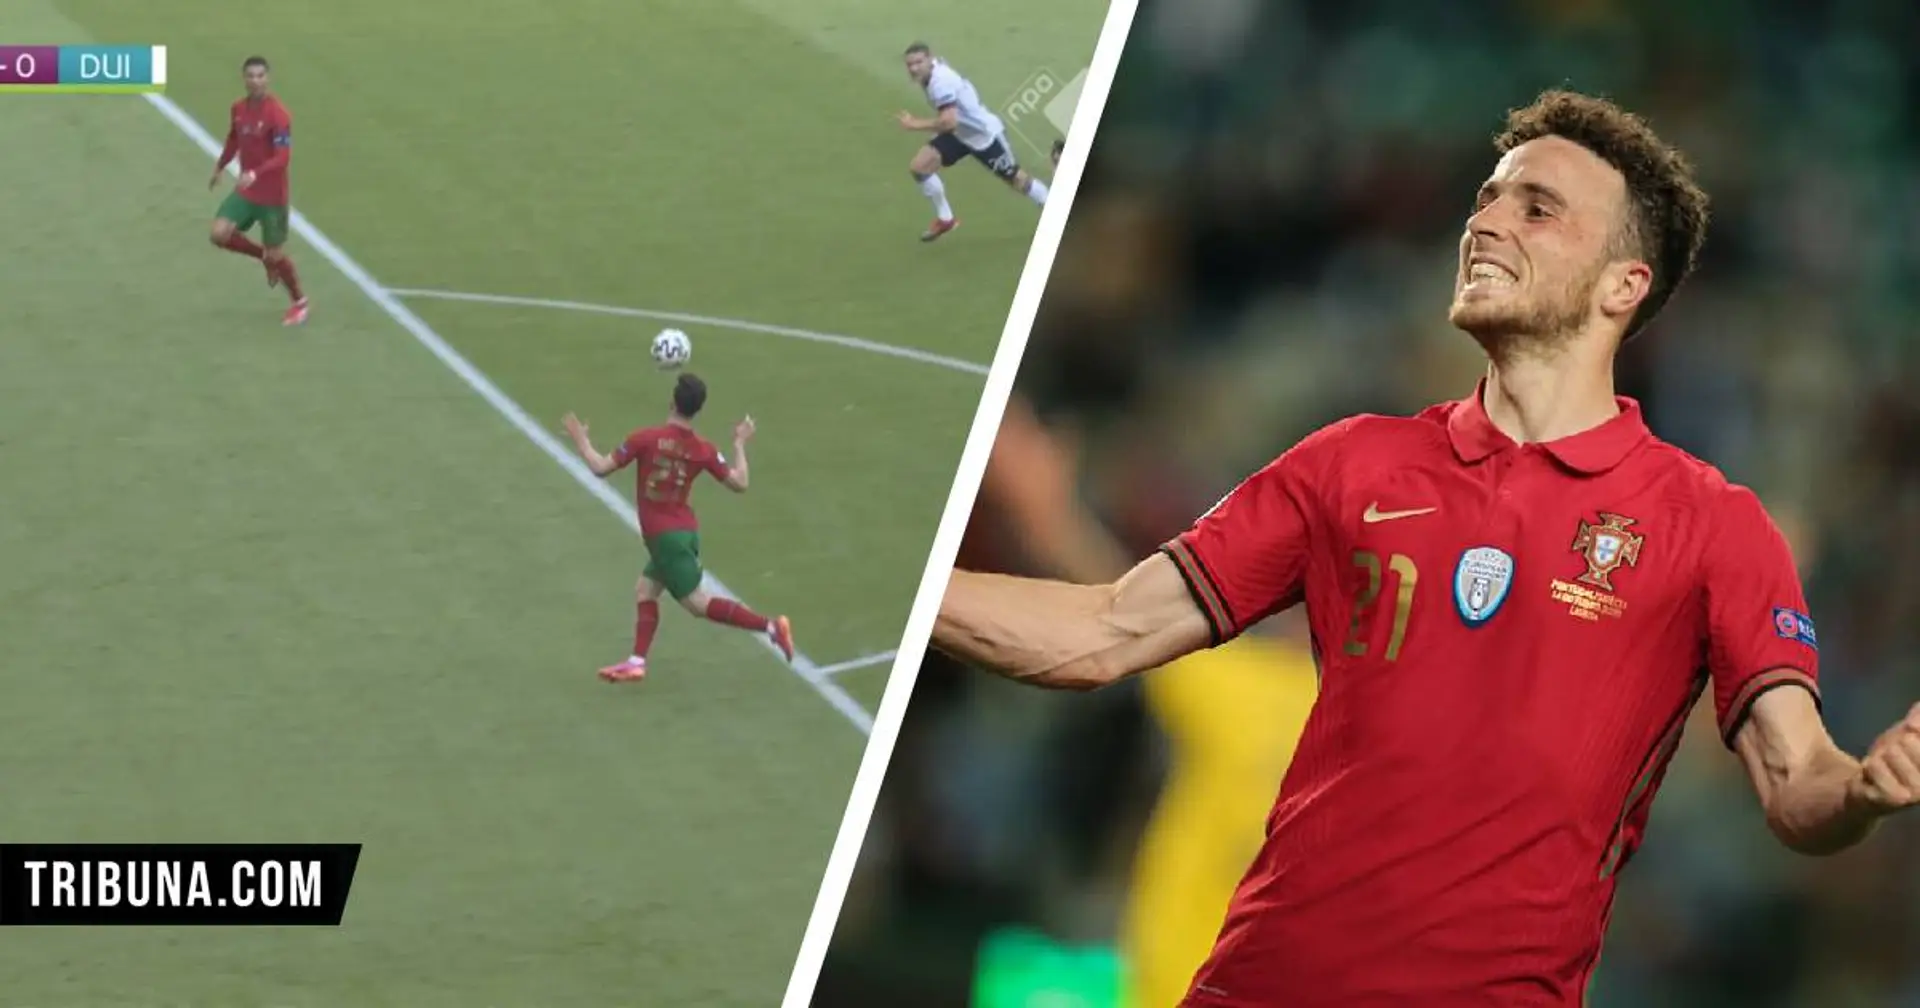 Slick Jota provides early assist to give Portugal lead against Germany